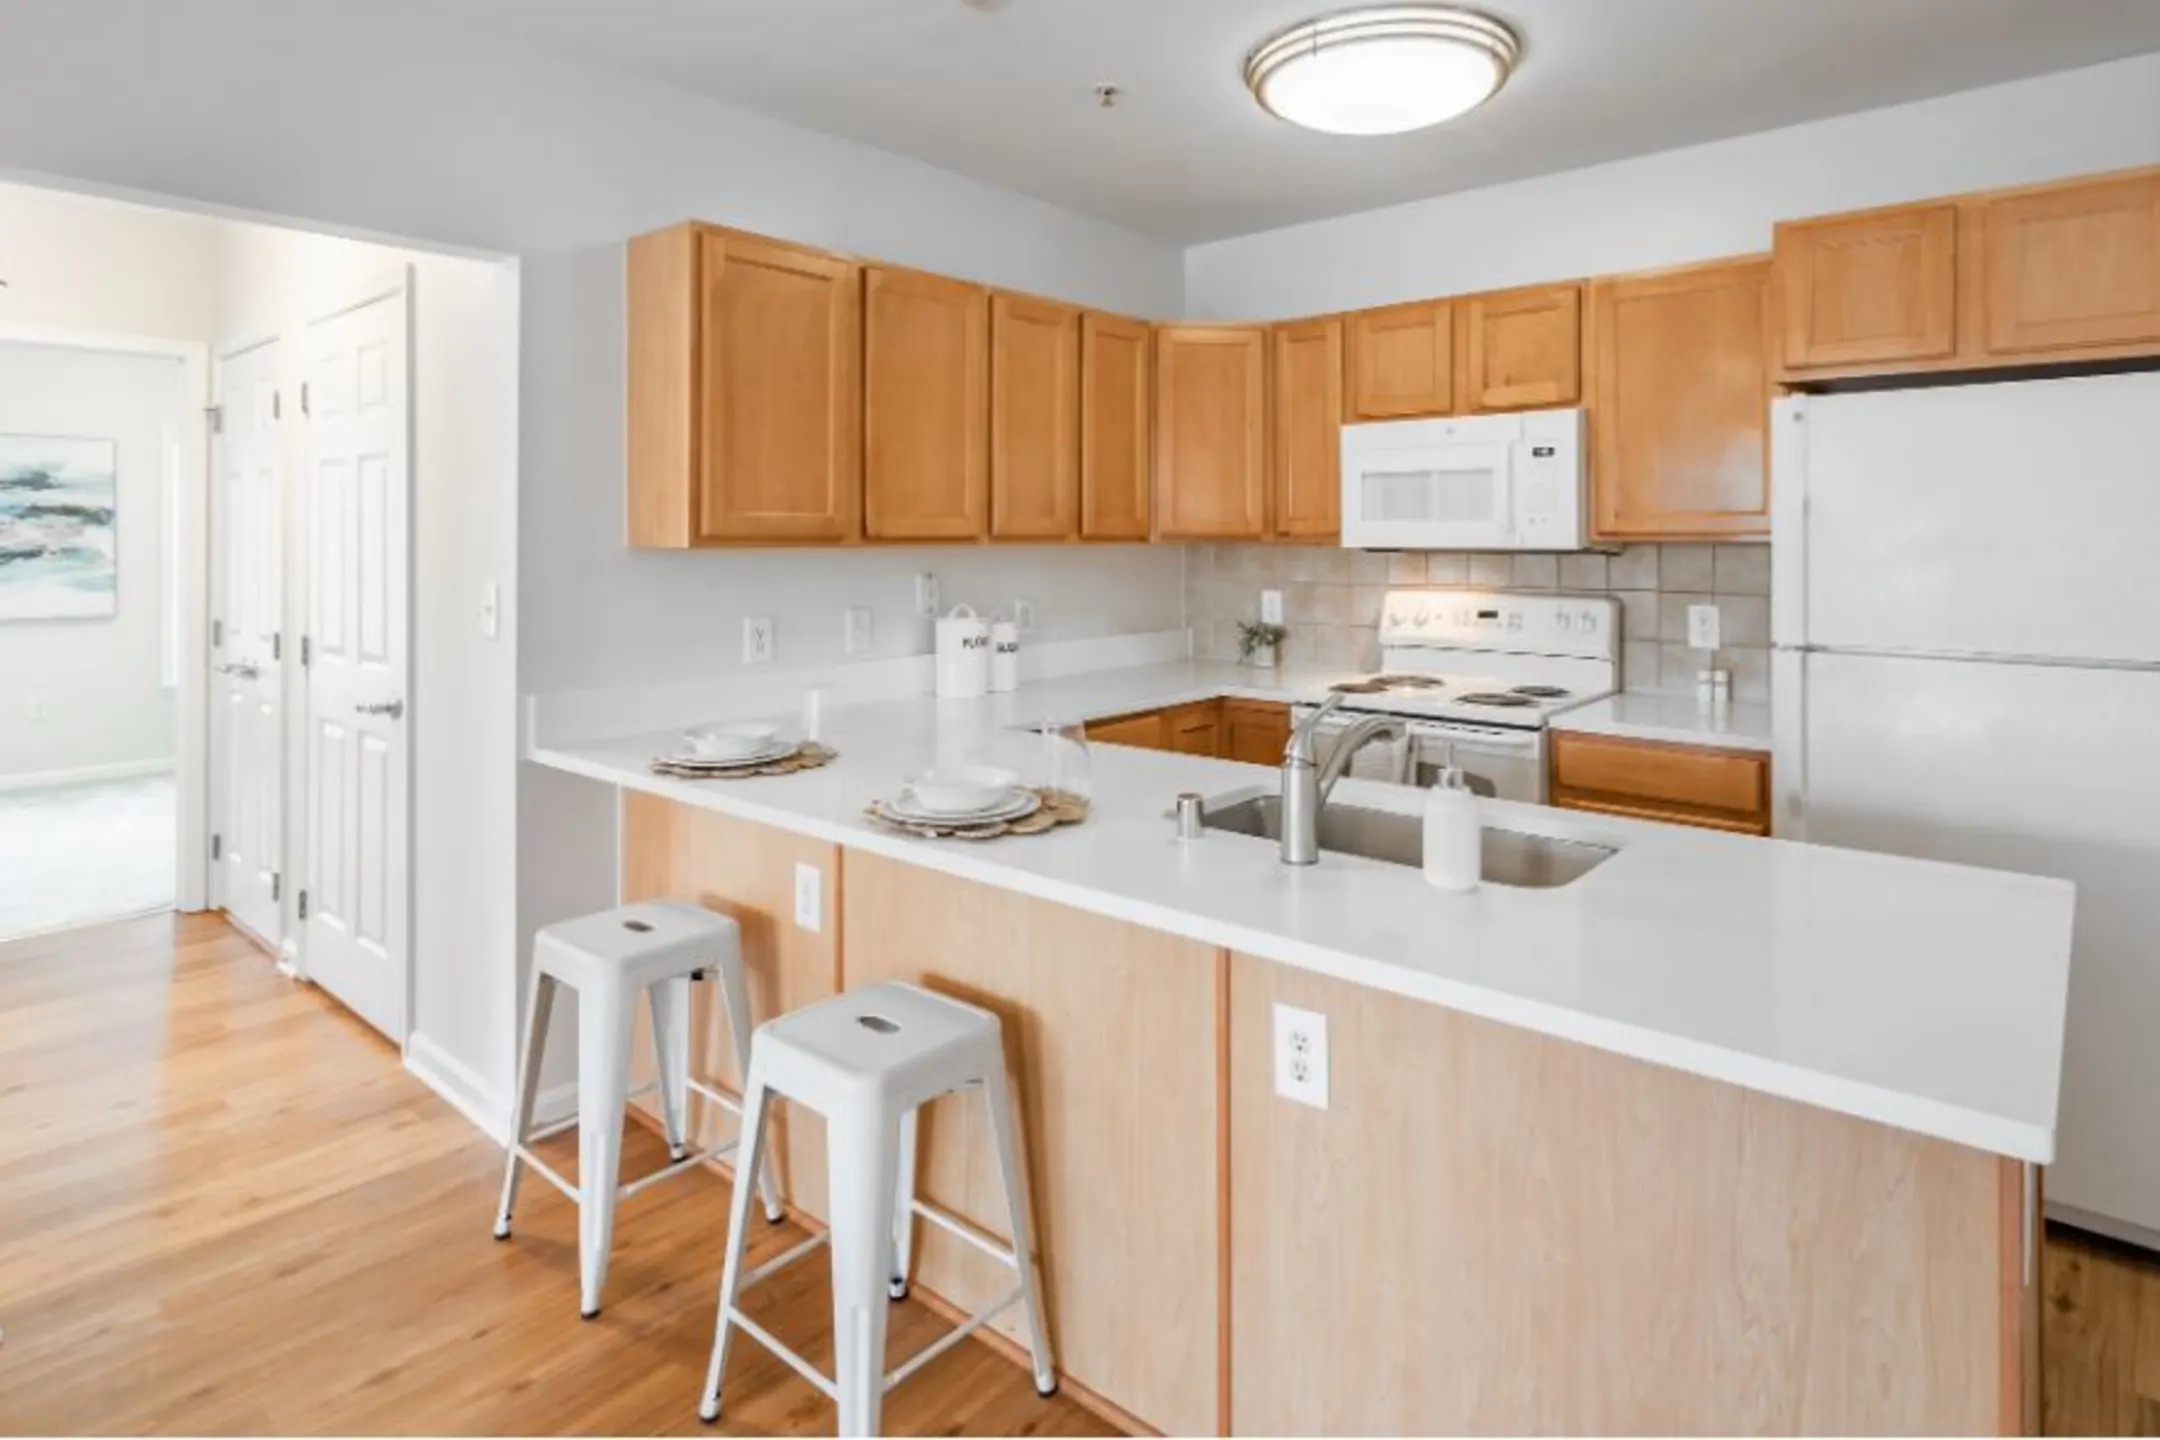 Kitchen - The Residences at Rollins Ridge - Rockville, MD